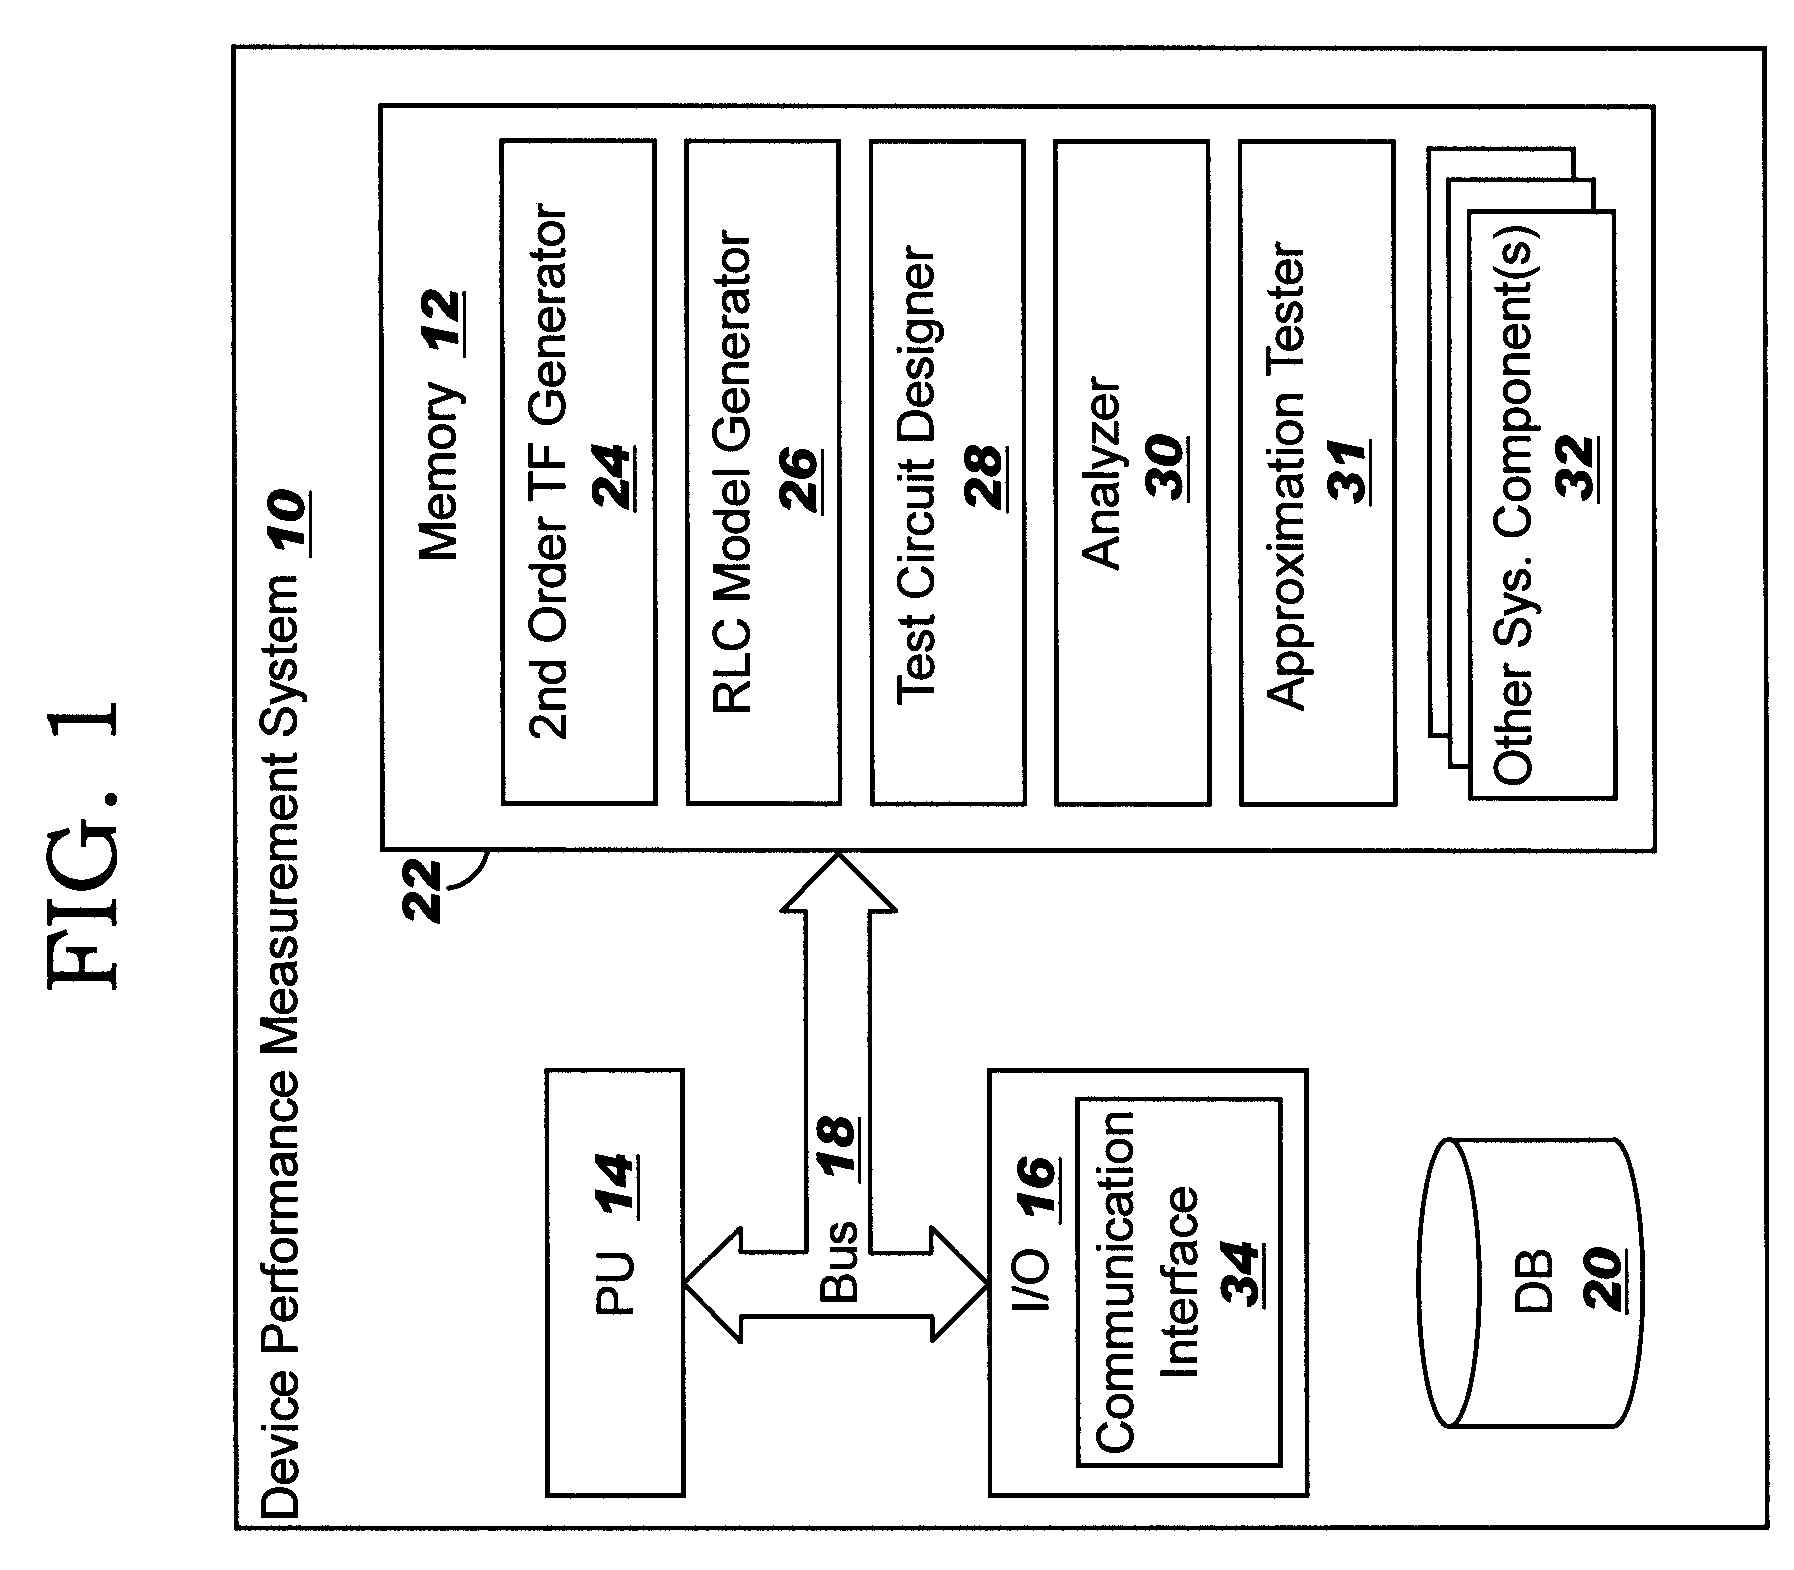 Performance measurement of device dedicated to phase locked loop using second order system approximation